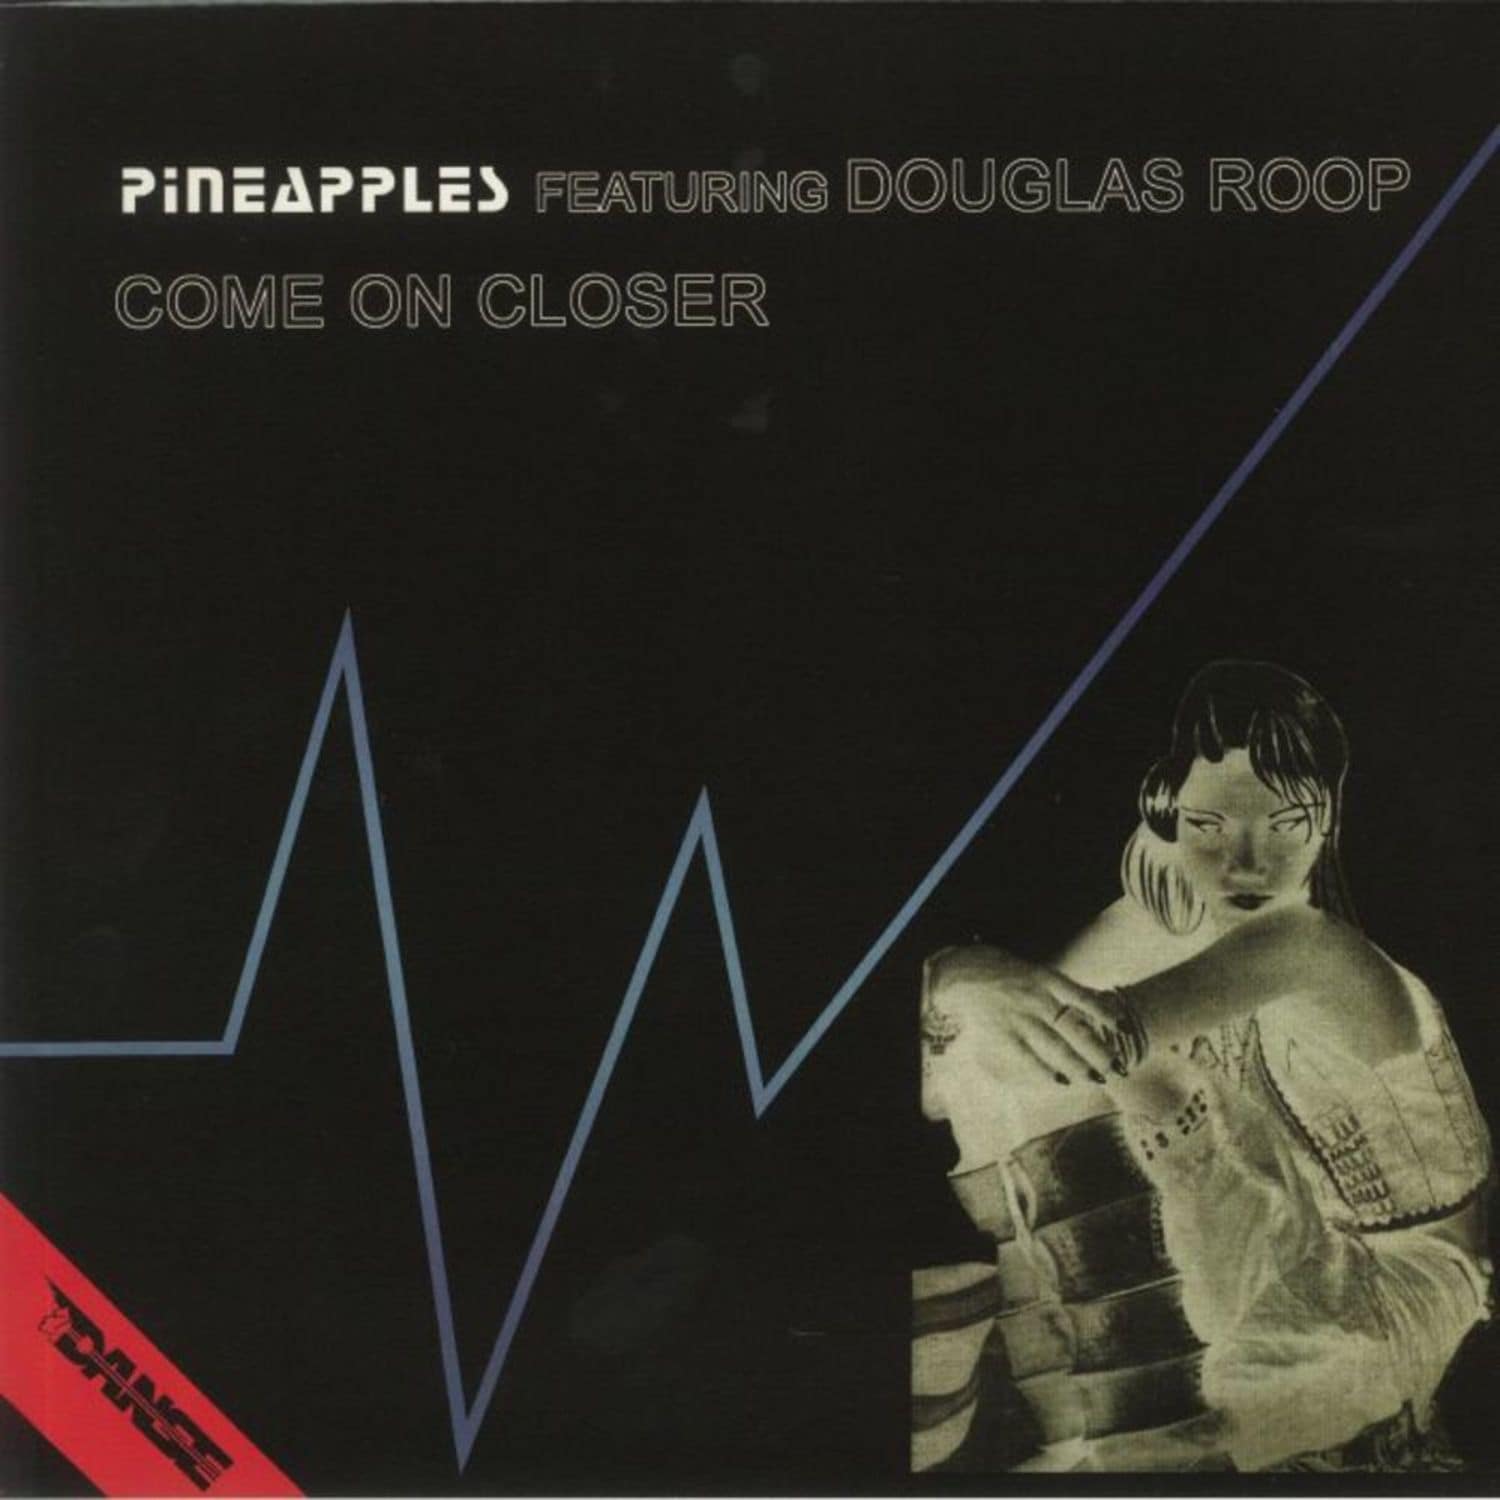 Pineapples feat Douglas Roop - COME ON CLOSER